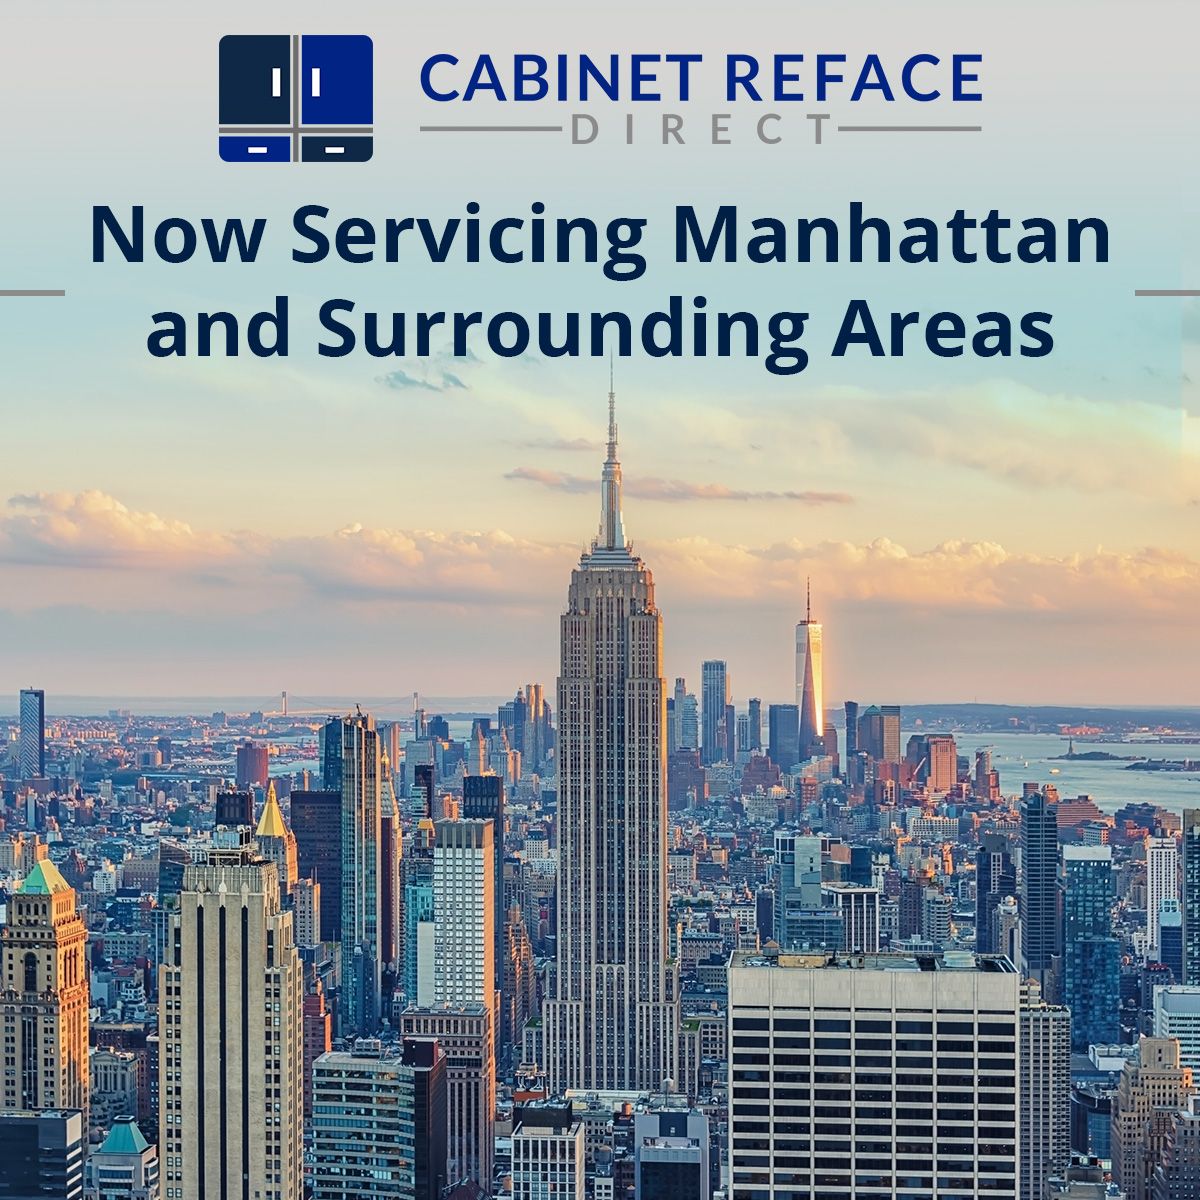 Cabinet Reface Direct Now Servicing Manhattan and Surrounding Areas